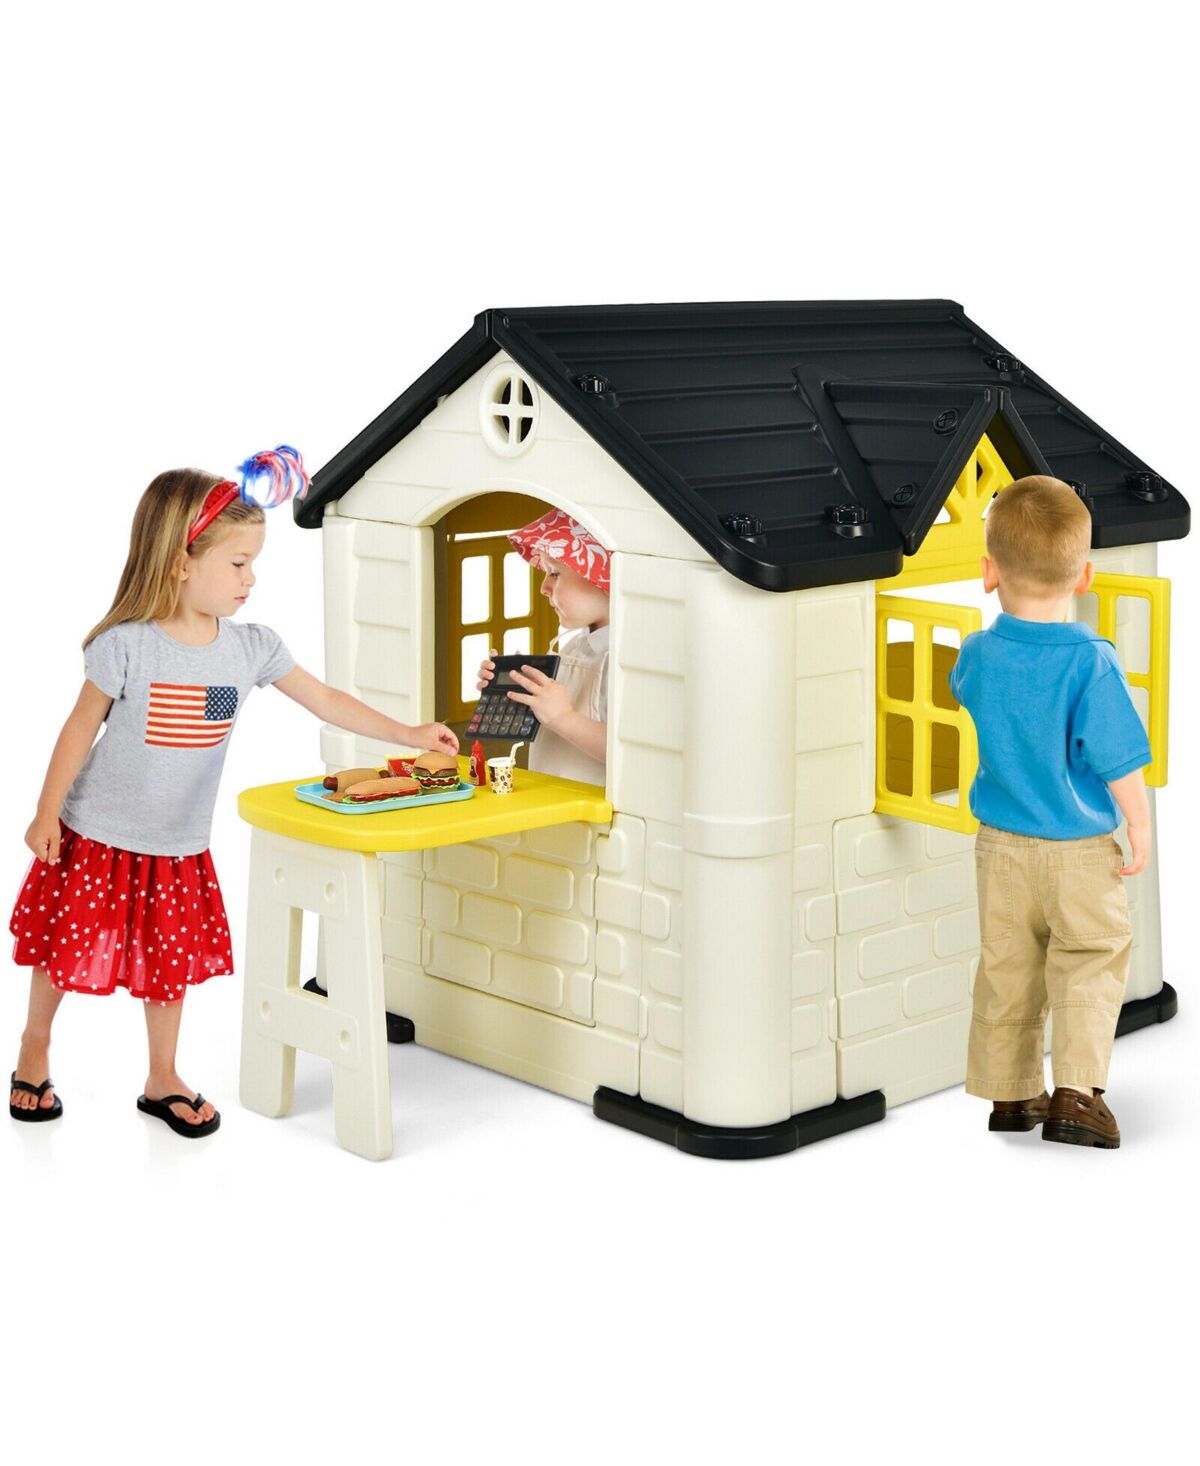 Costway Kid's Playhouse Games Cottage w/ 7 Pcs Toy Set & Waterproof Cover - Yellow